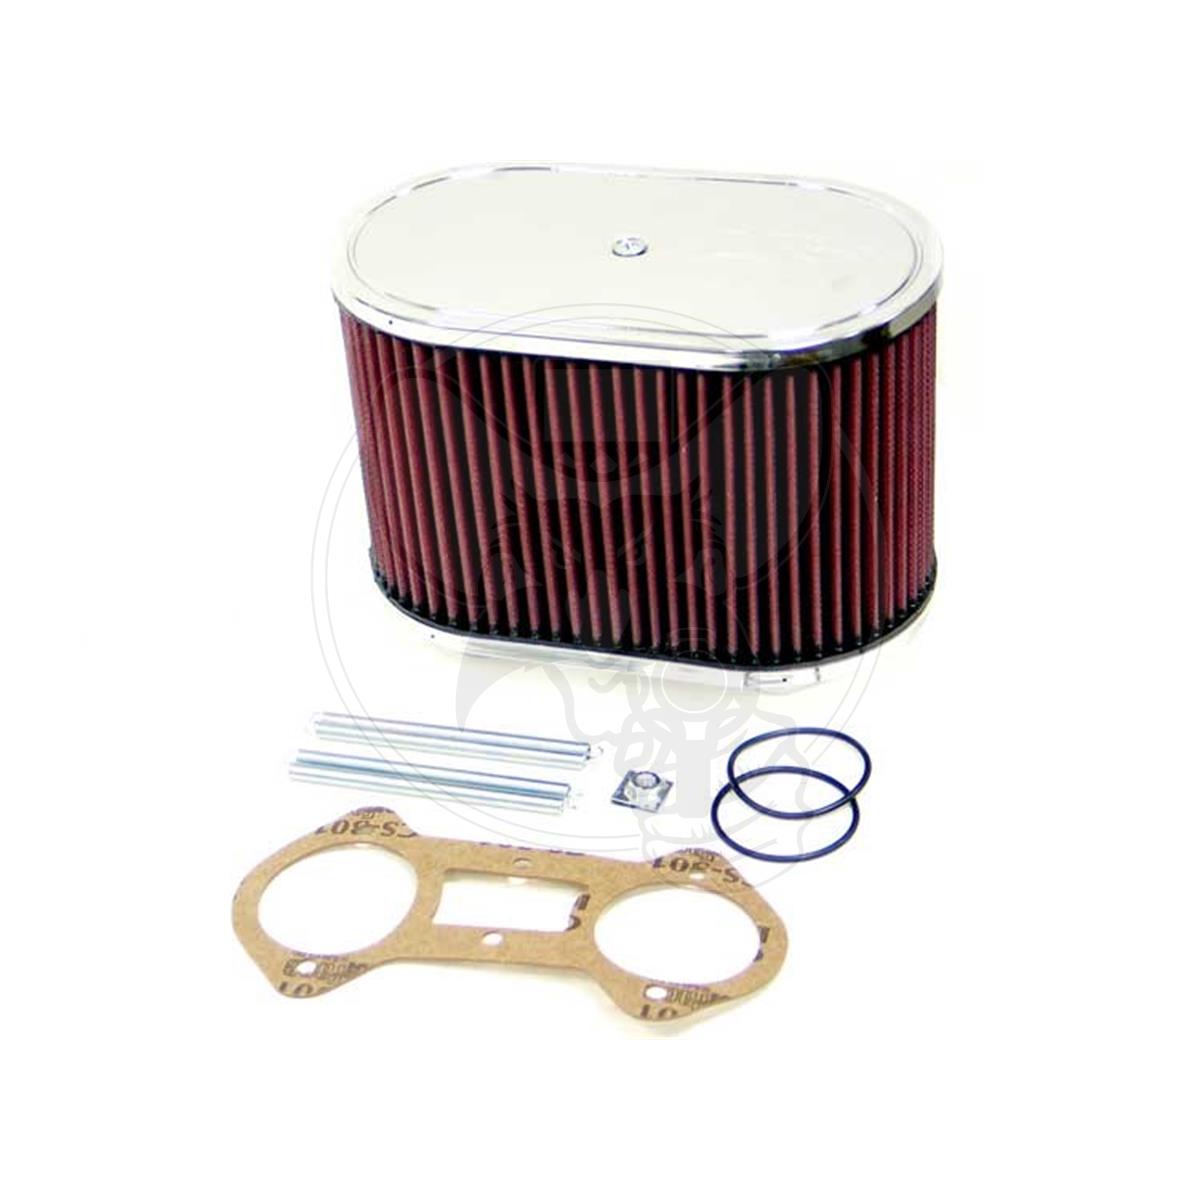 KN56-1230 - K&N AIR CLEANER ASSEMBLY FITS 48 IDA WEBER CARBY 5.5